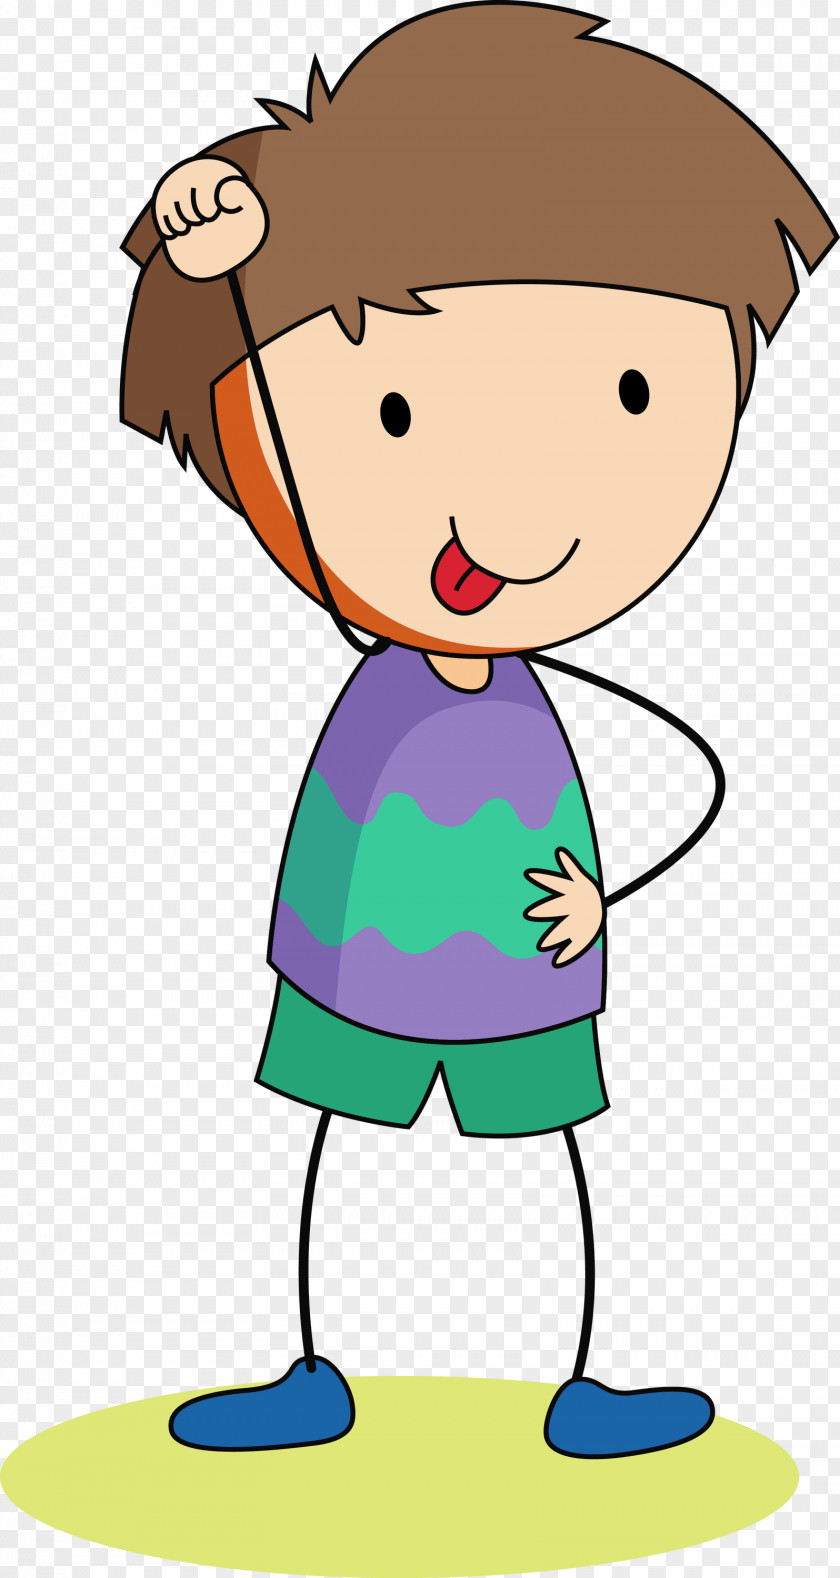 Cartoon Child Pleased PNG